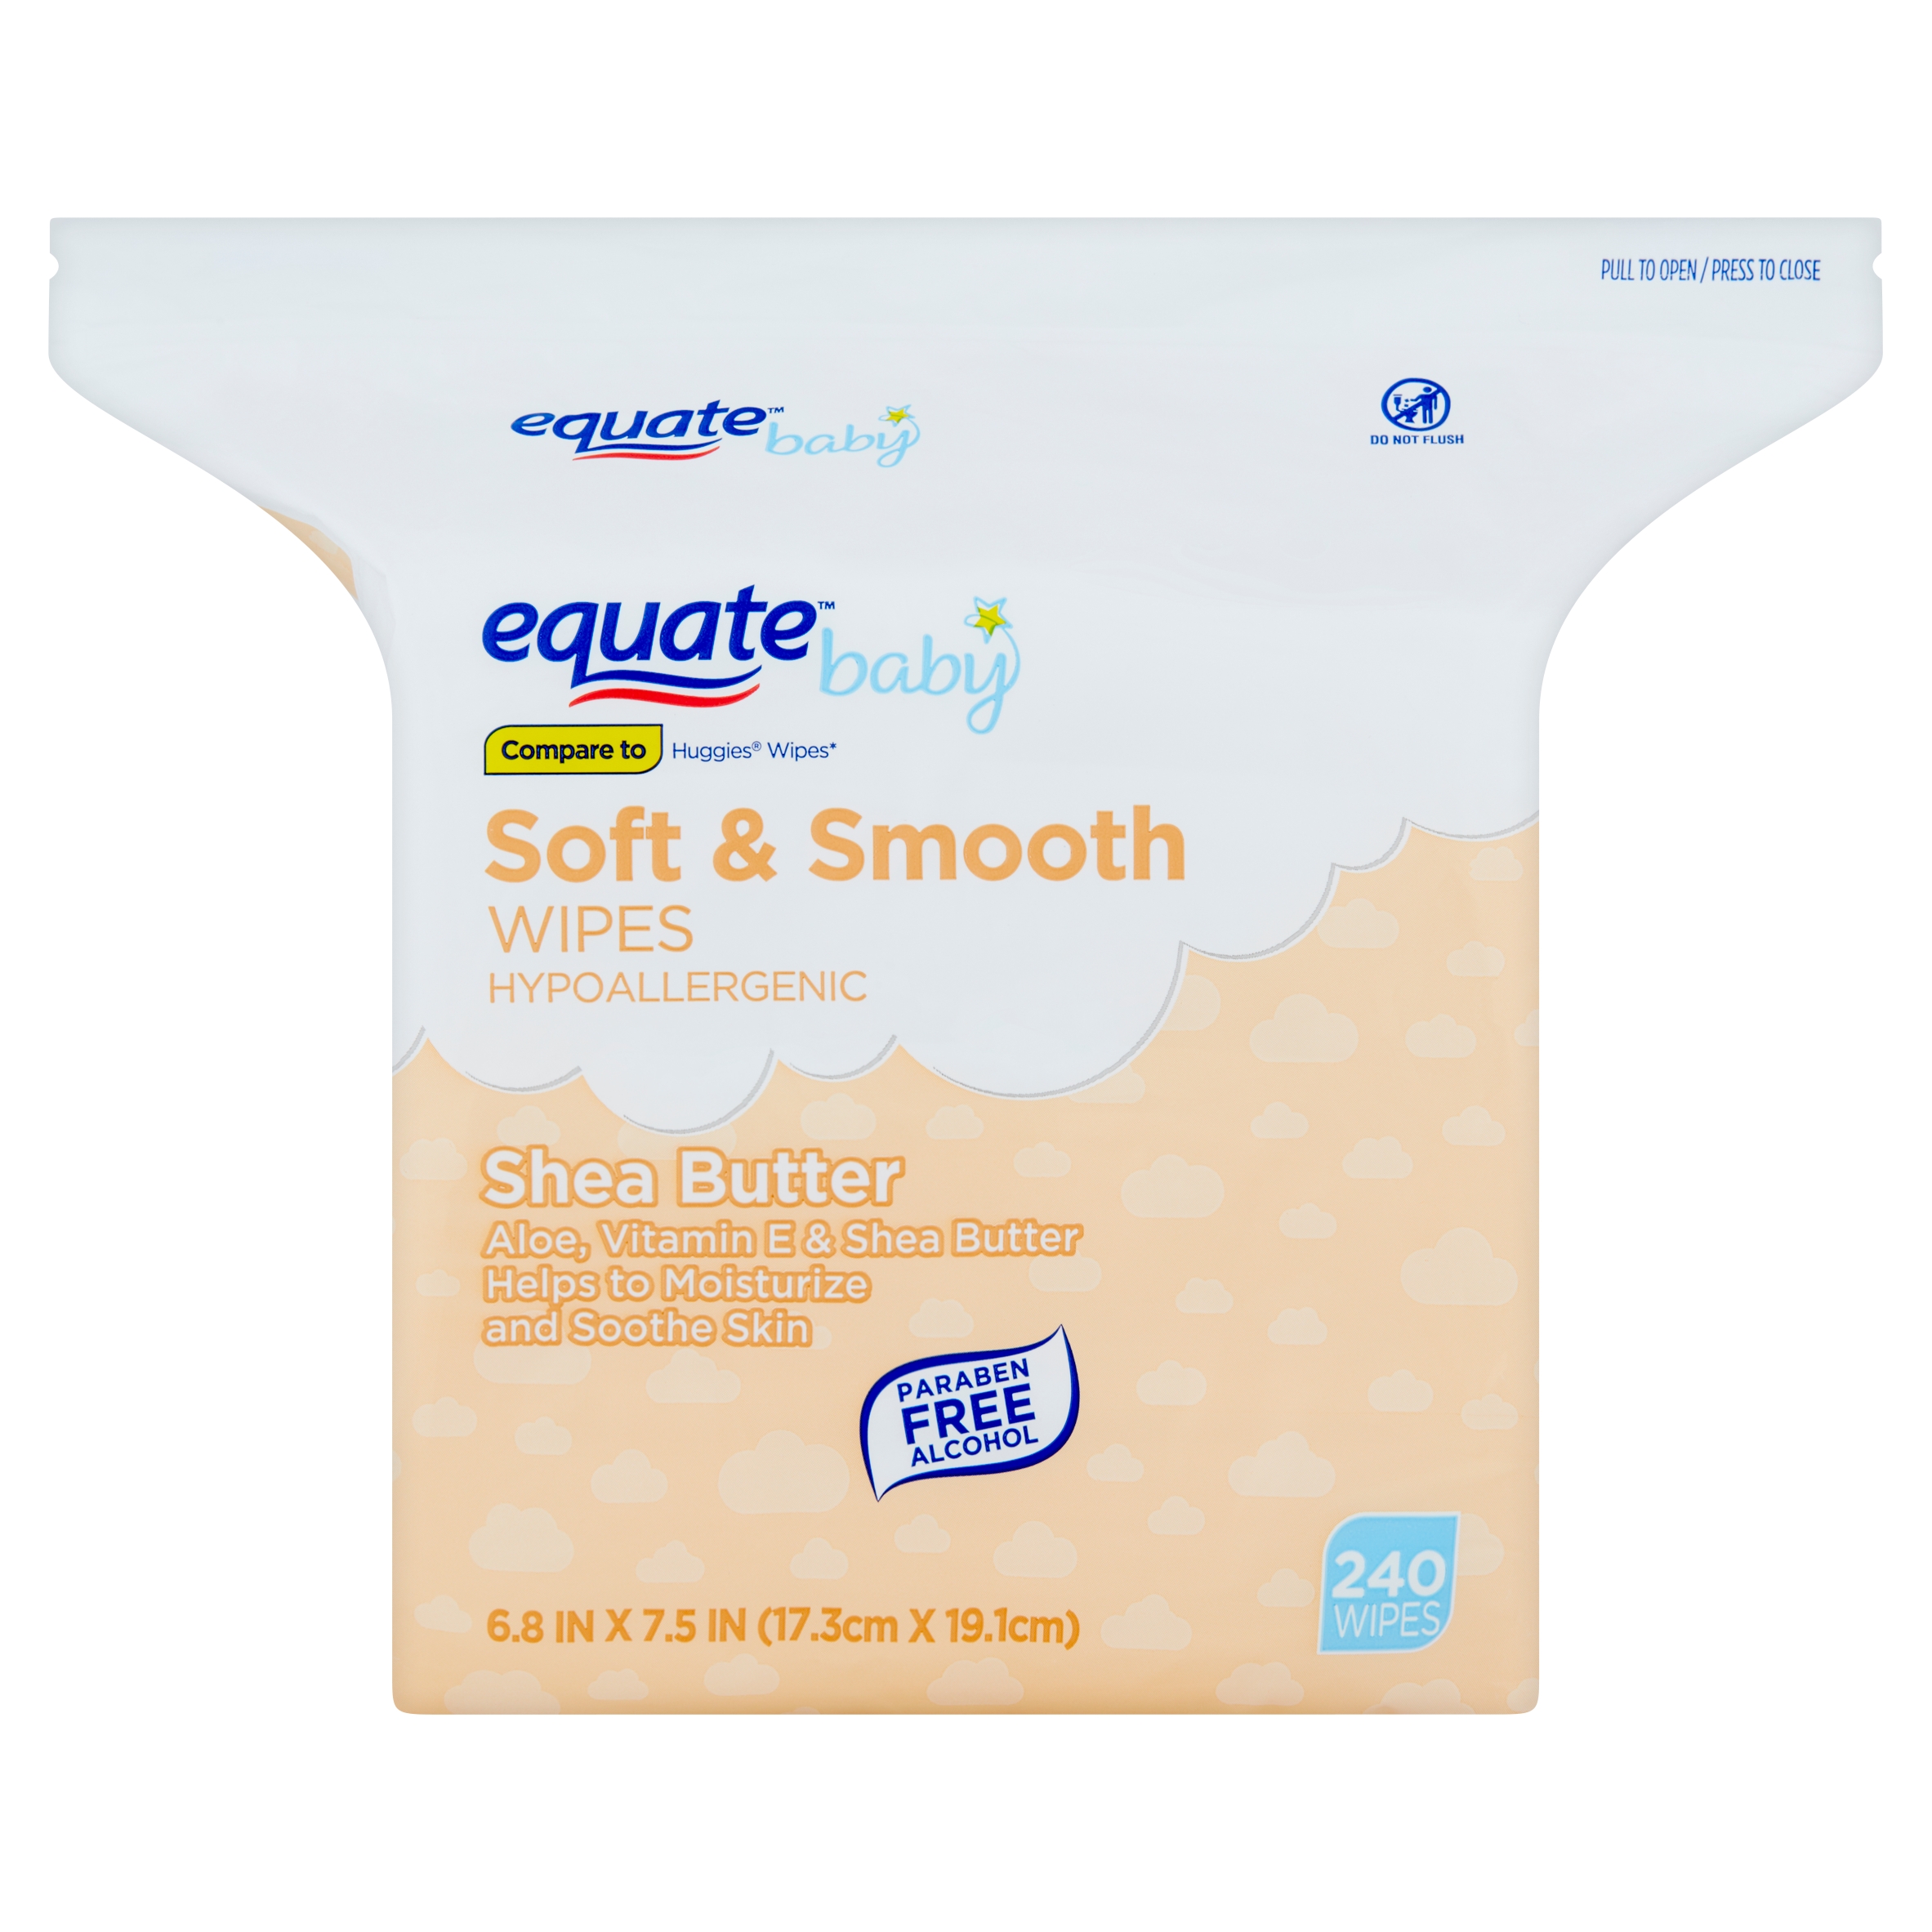 Equate Baby Soft & Smooth Shea Butter Wipes, 240 Count - image 3 of 10